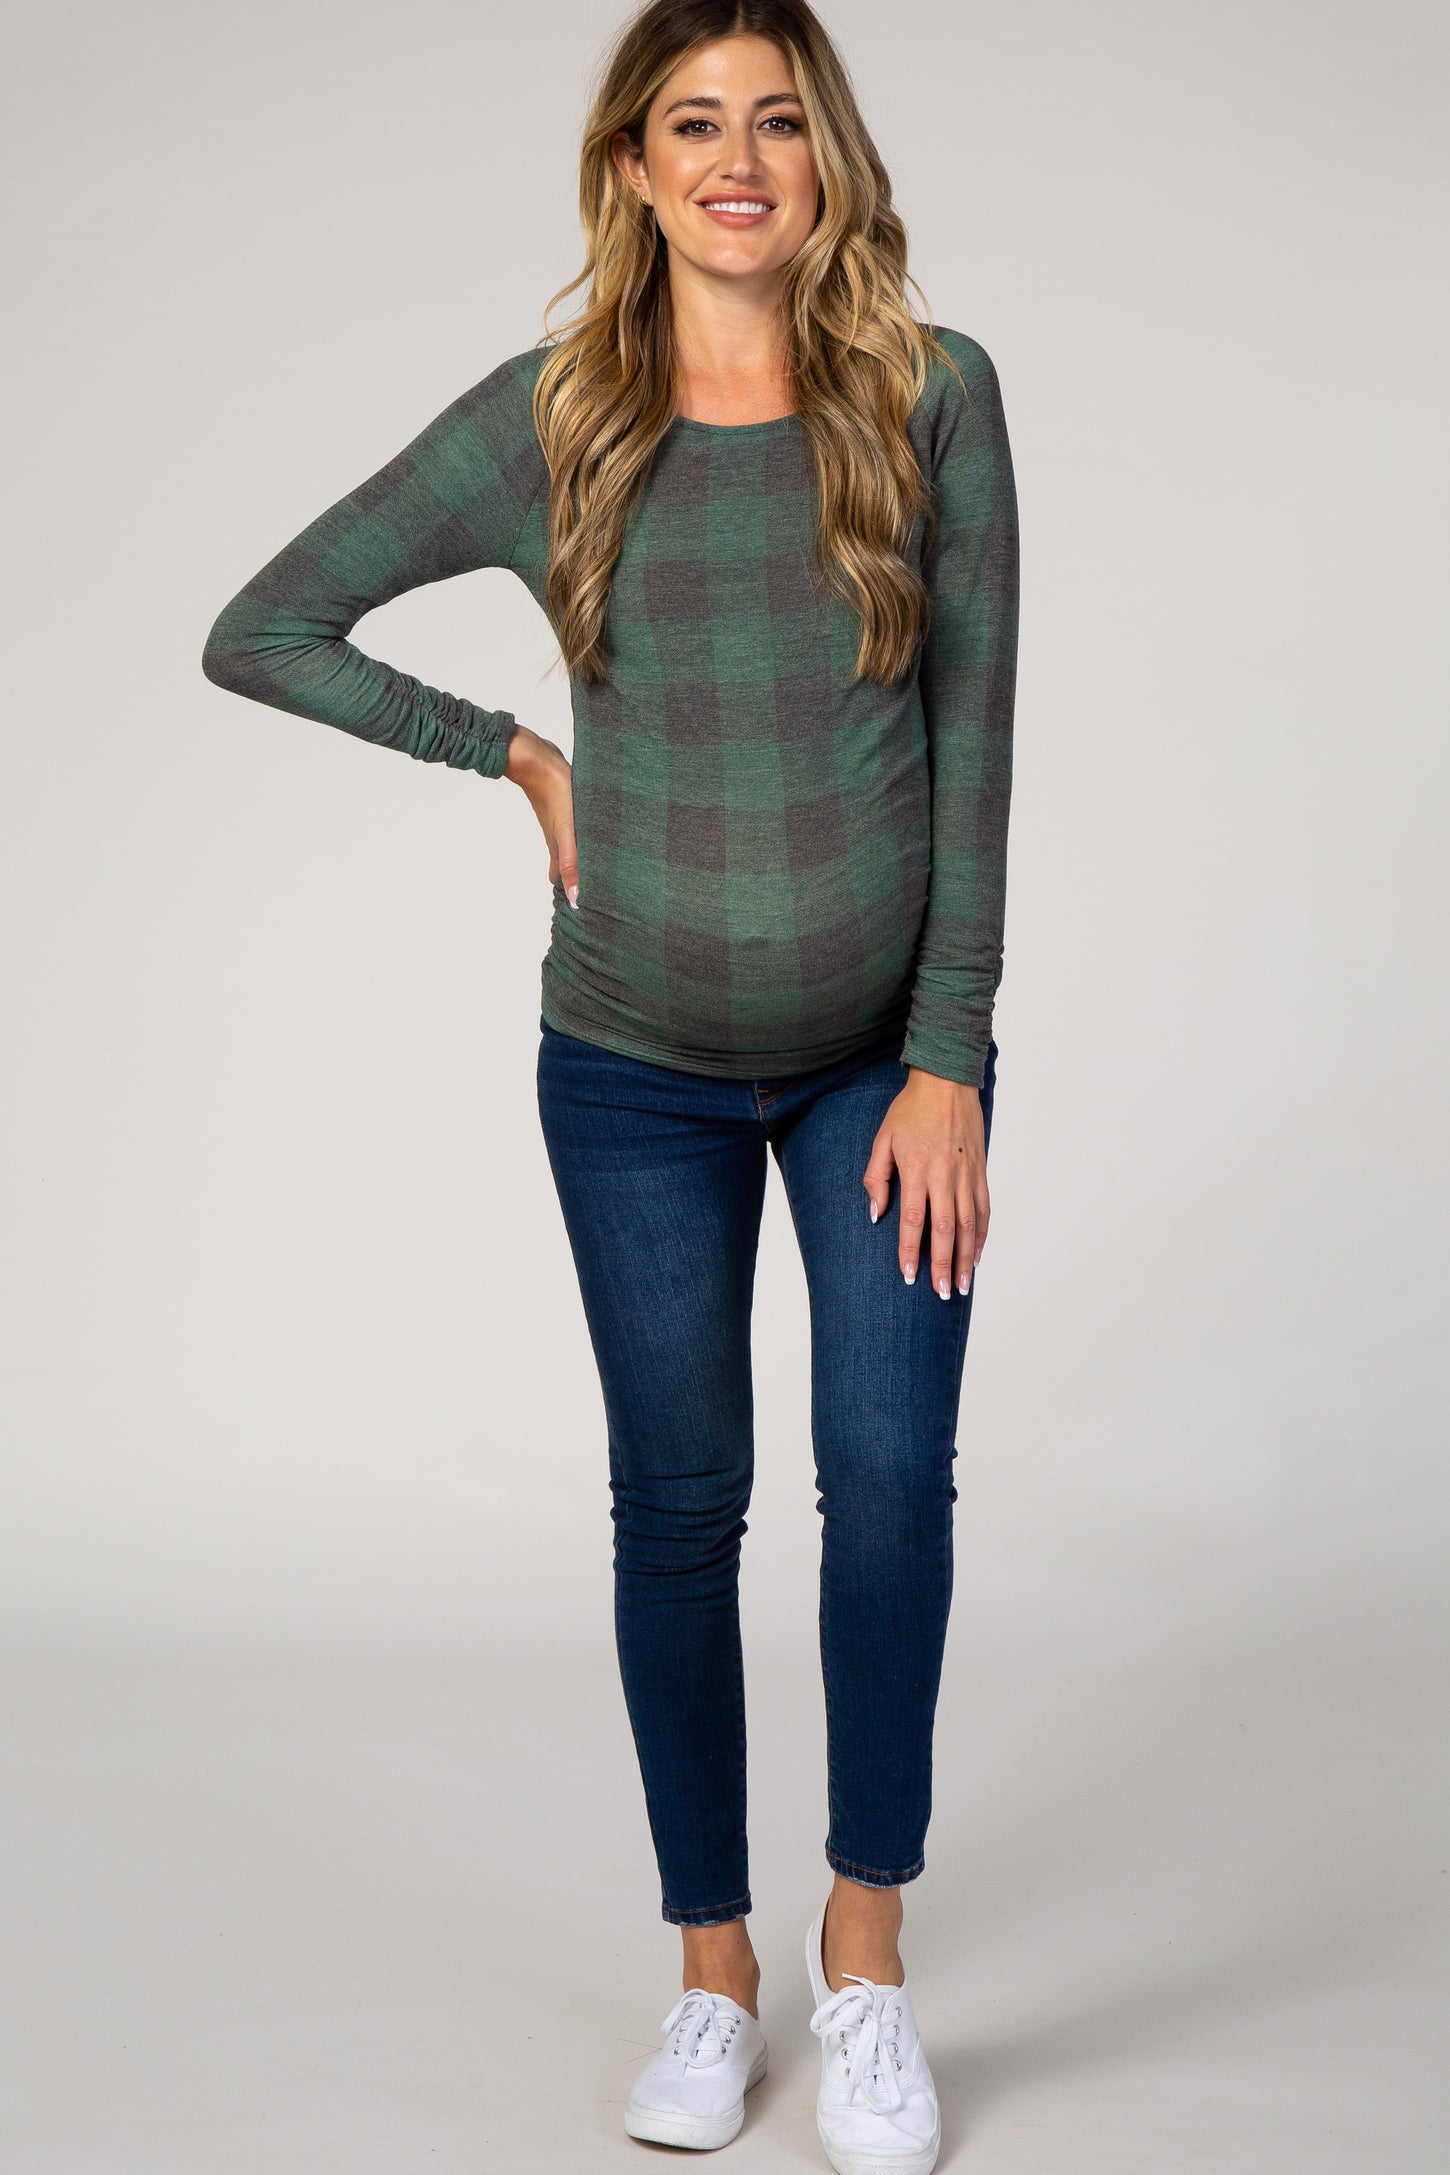 Green Plaid Knit Ruched Maternity Top